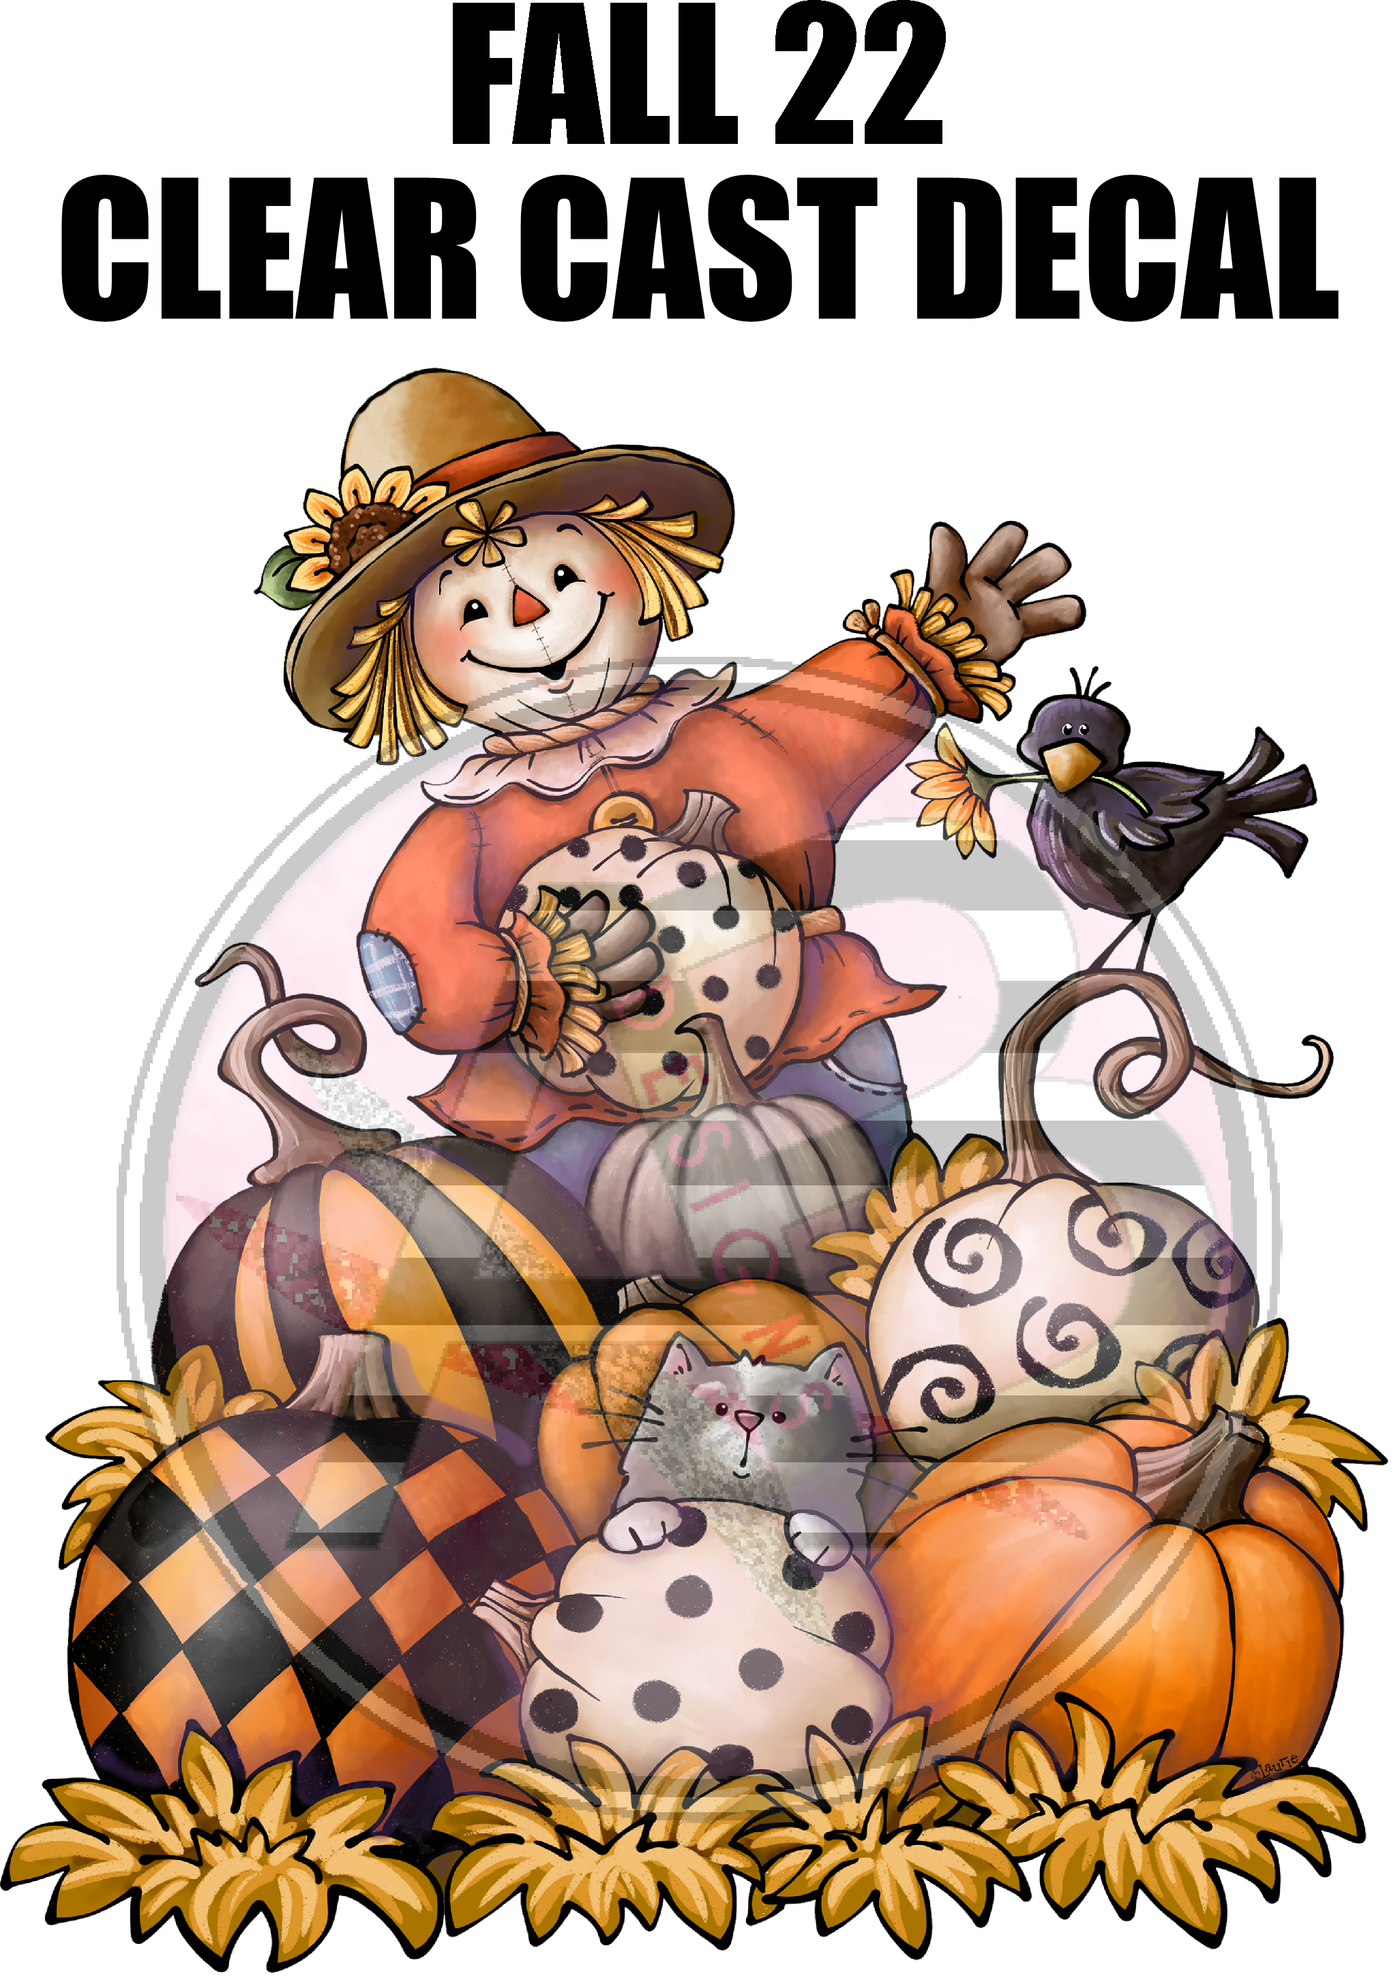 Fall 22 - Clear Cast Decal